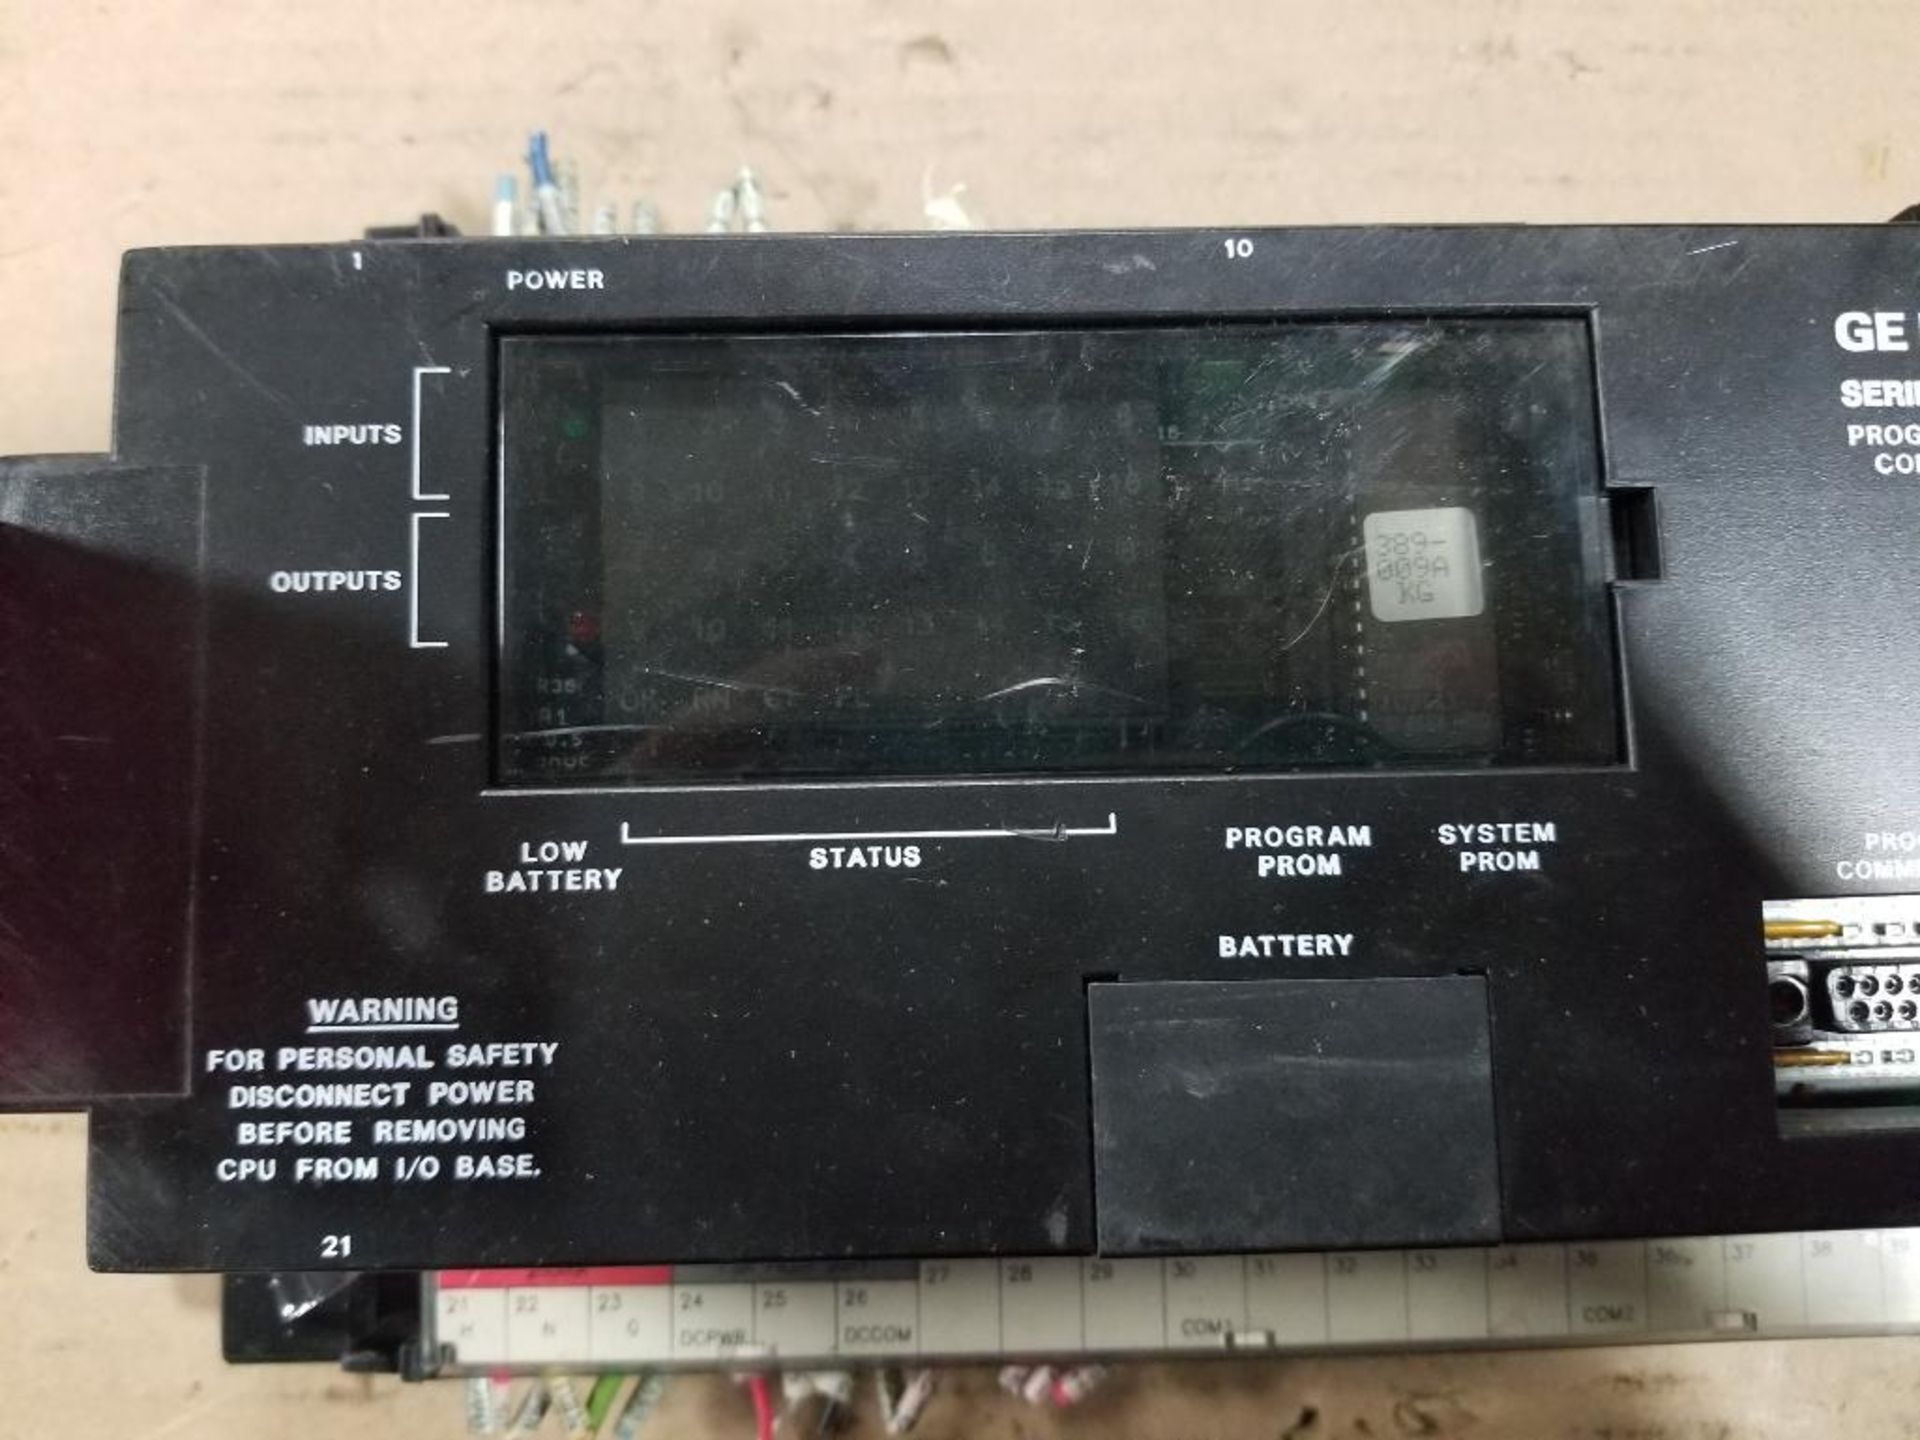 GE Fanuc Series 90-20 programmable controller. - Image 4 of 8